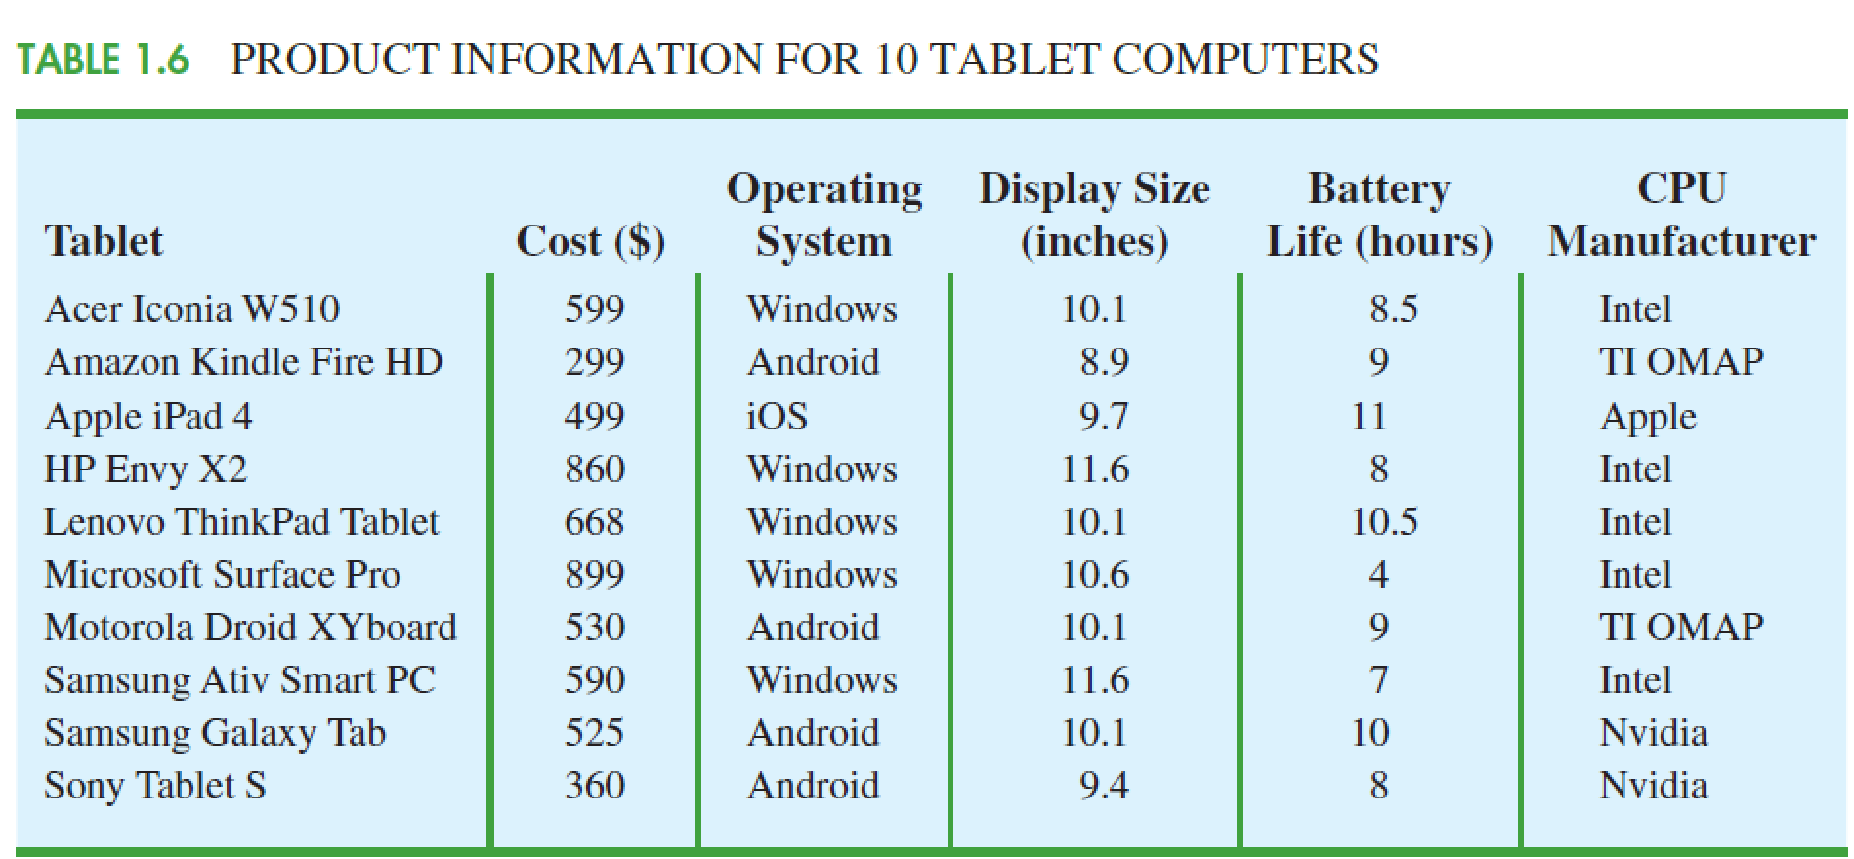 Chapter 1, Problem 3SE, Refer to Table 1.6.
What is the average cost for the tablets?
Compare the average cost of tablets 